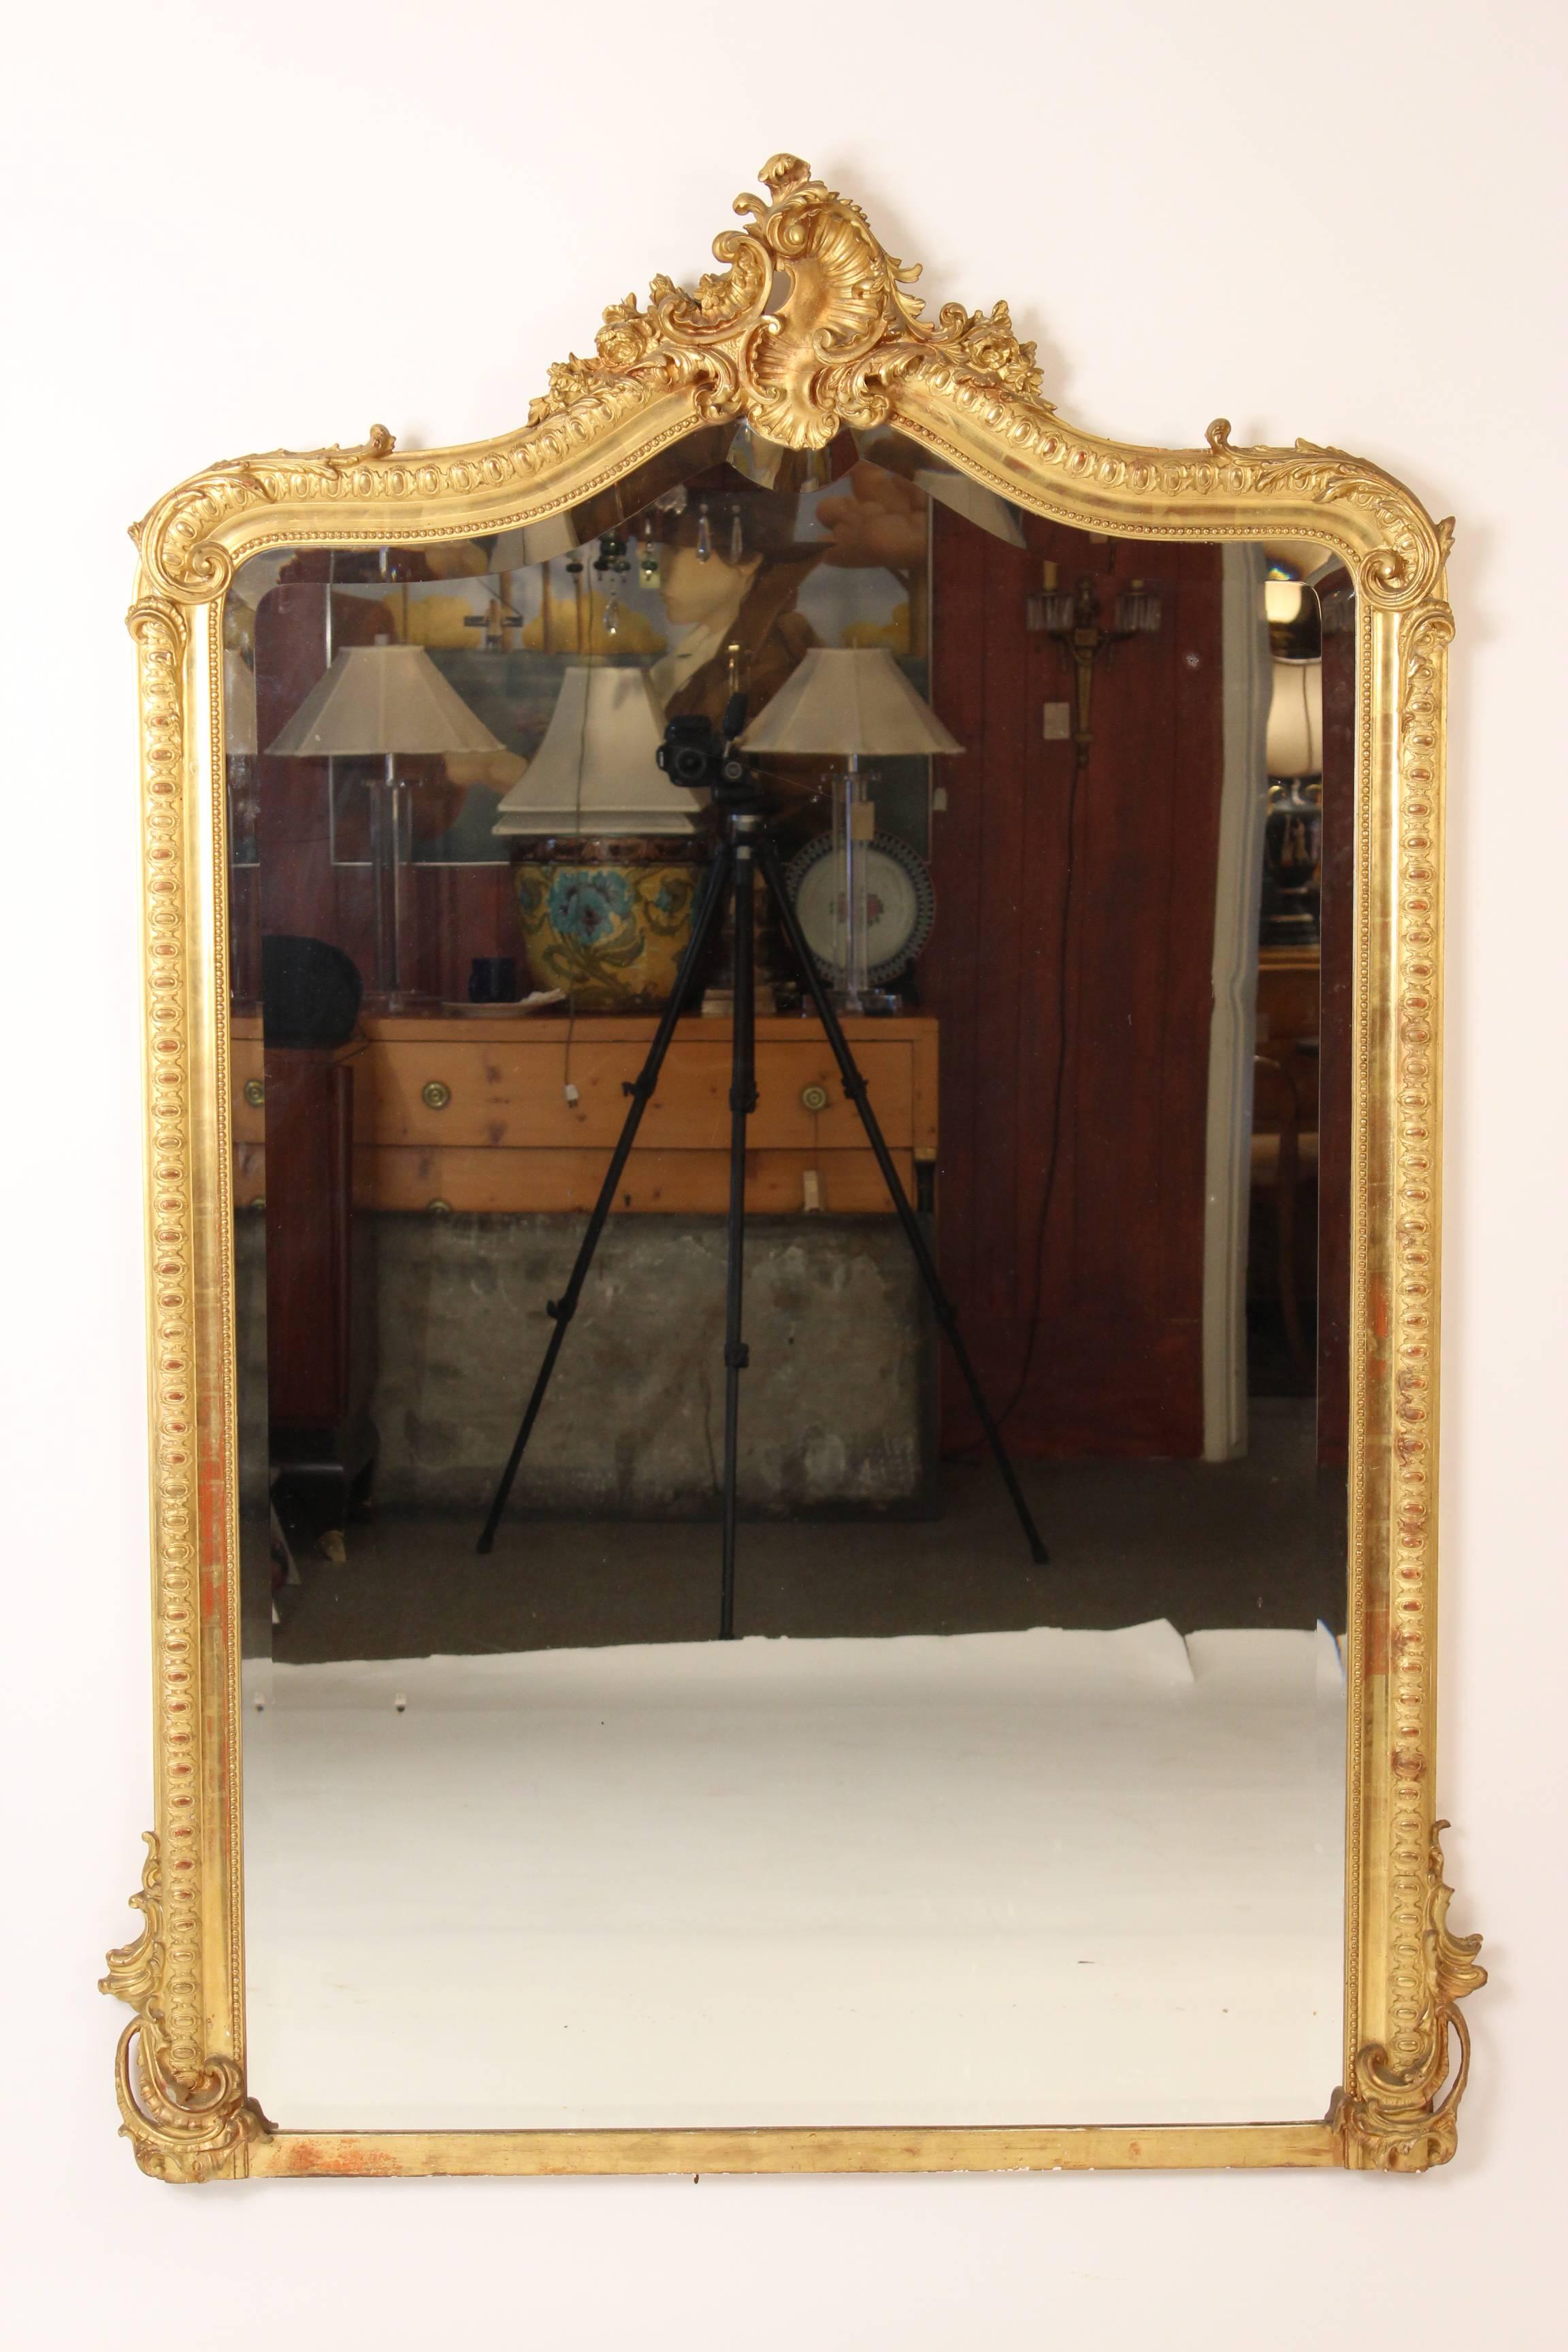 Louis XV style giltwood mirror, circa 1900. This mirror has fine quality original gold leaf. The glass is original, beveled and shows signs of aging.